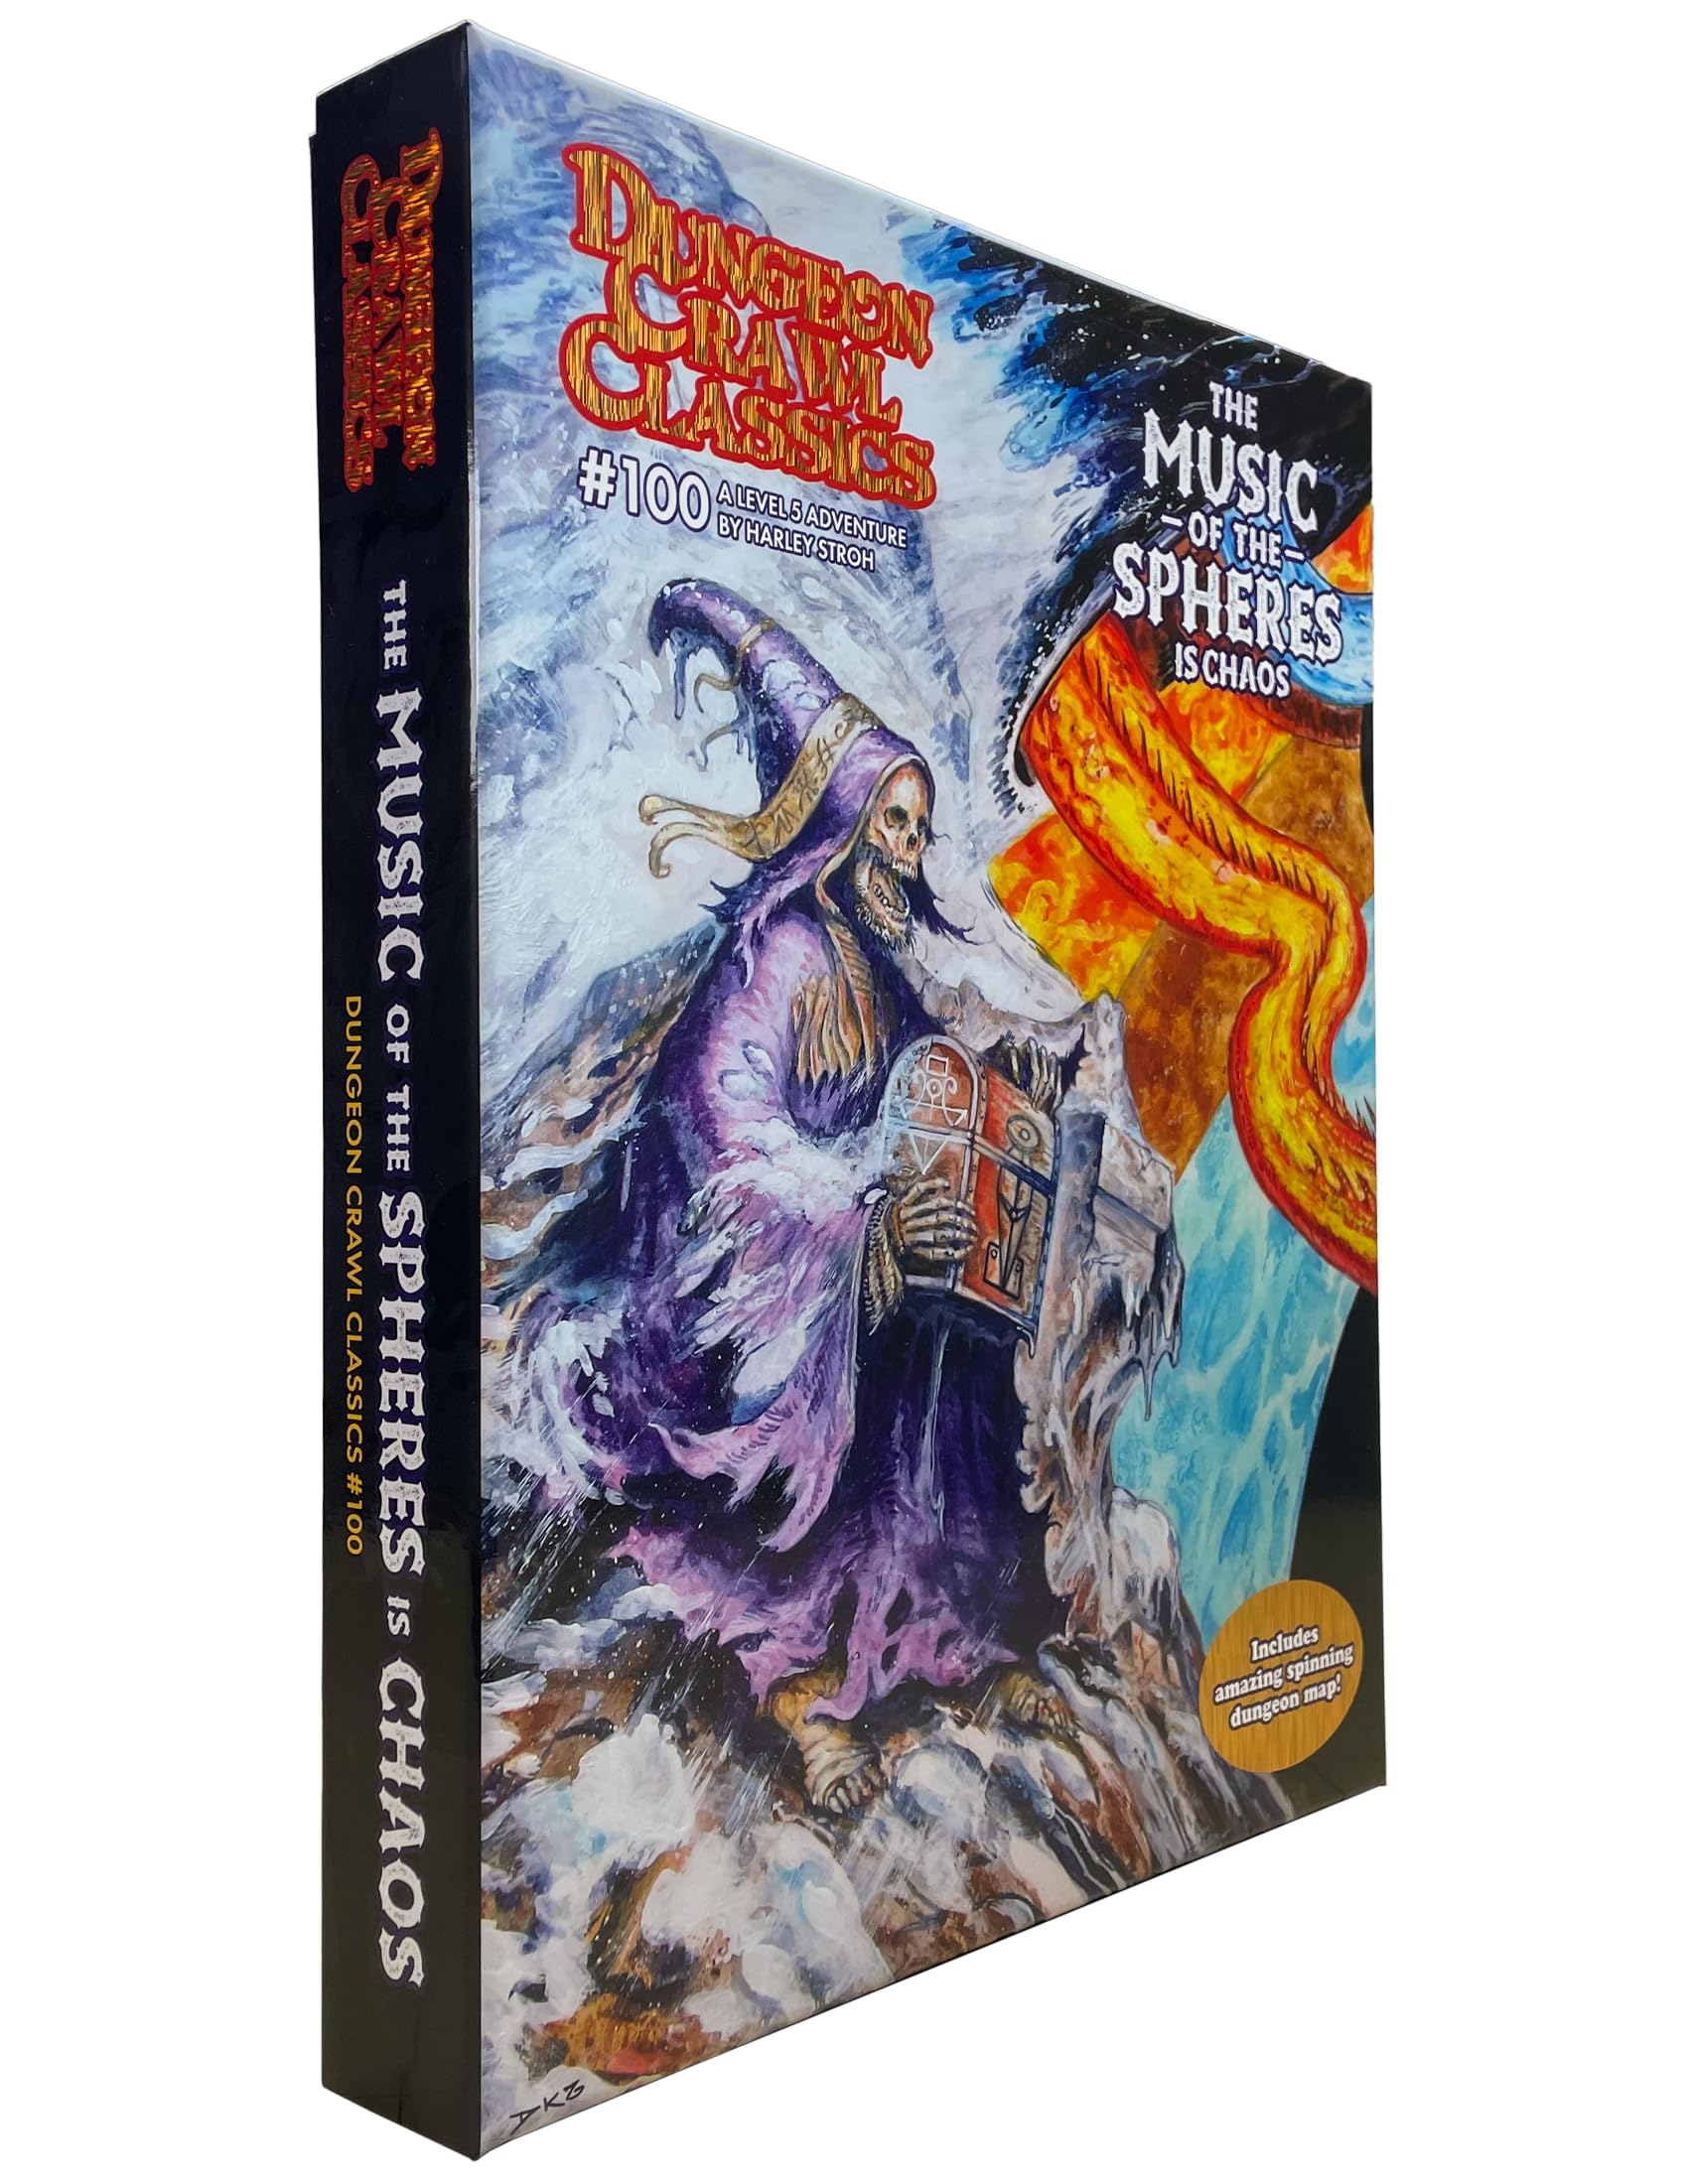 Goodman Games Dungeon Crawl Classics #100: The Music of The Spheres is Chaos - Boxed Set,Black